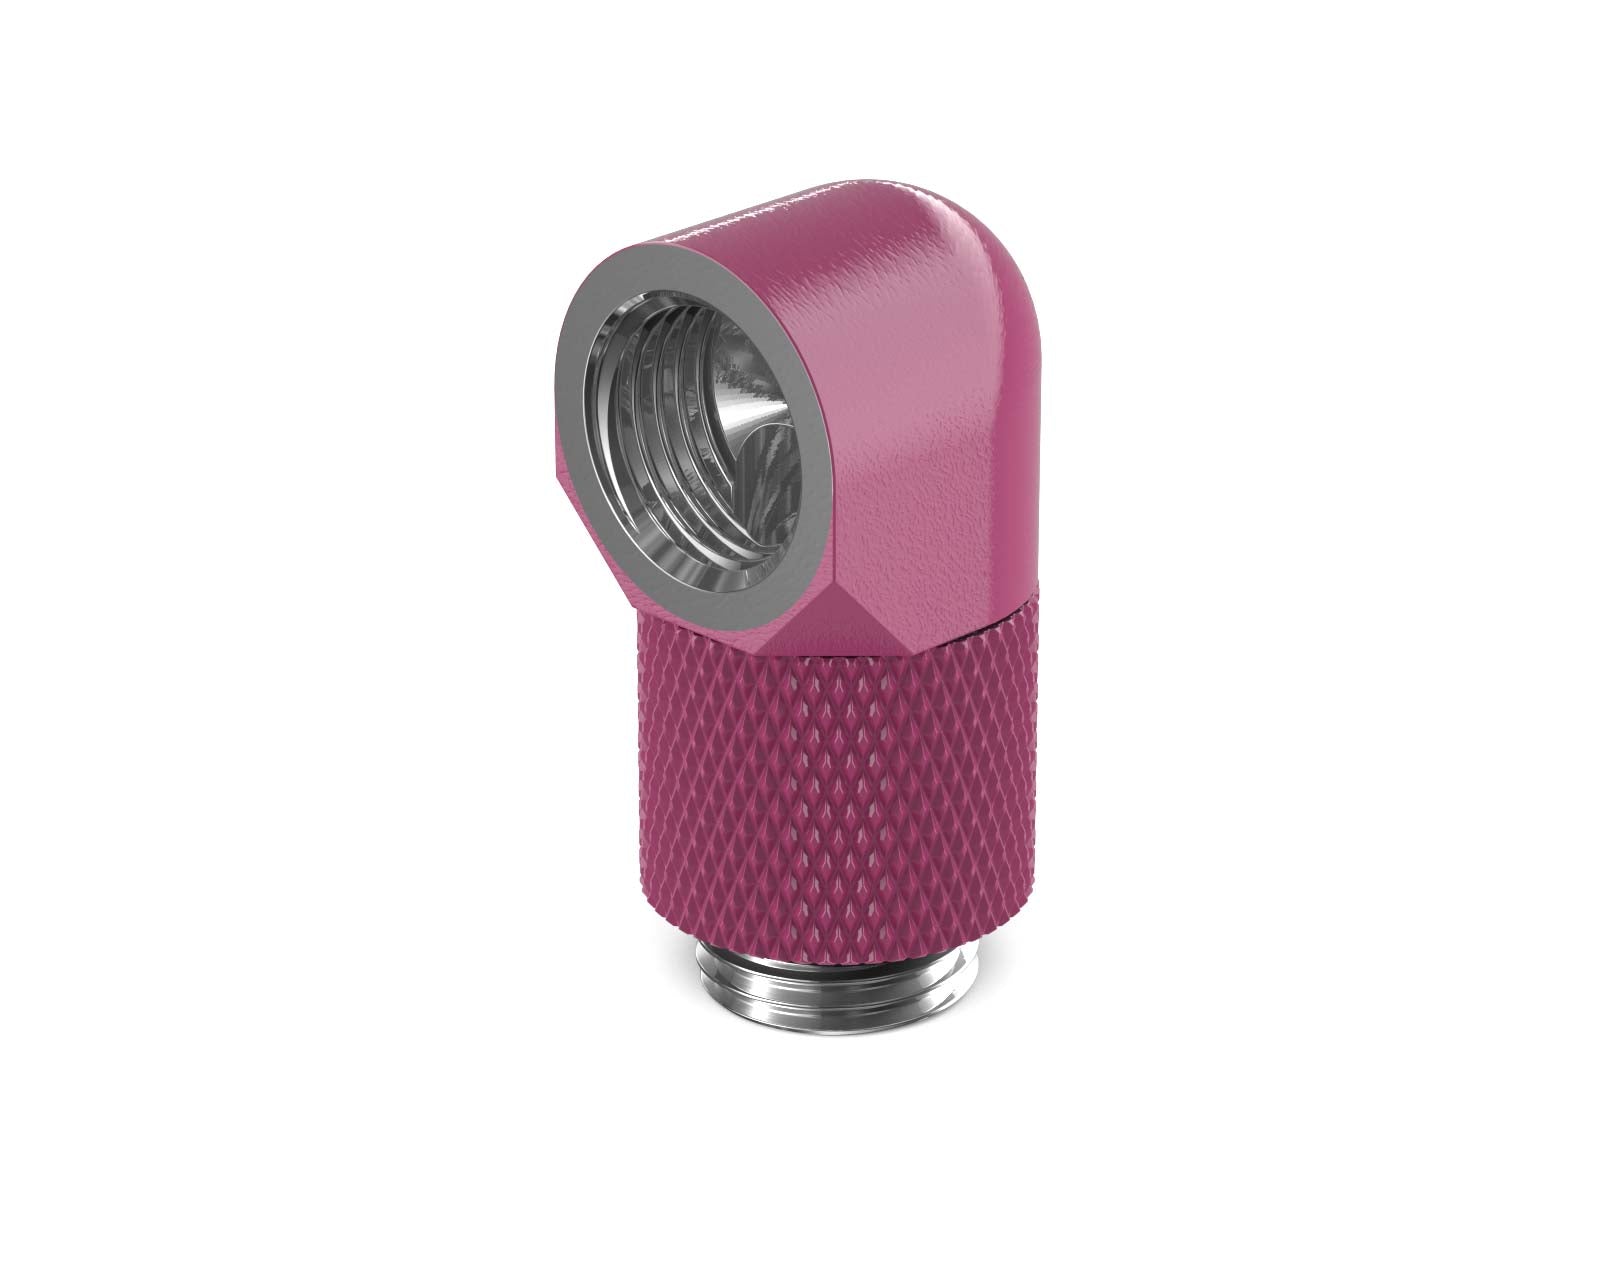 PrimoChill Male to Female G 1/4in. 90 Degree SX Rotary 15mm Extension Elbow Fitting - PrimoChill - KEEPING IT COOL Magenta